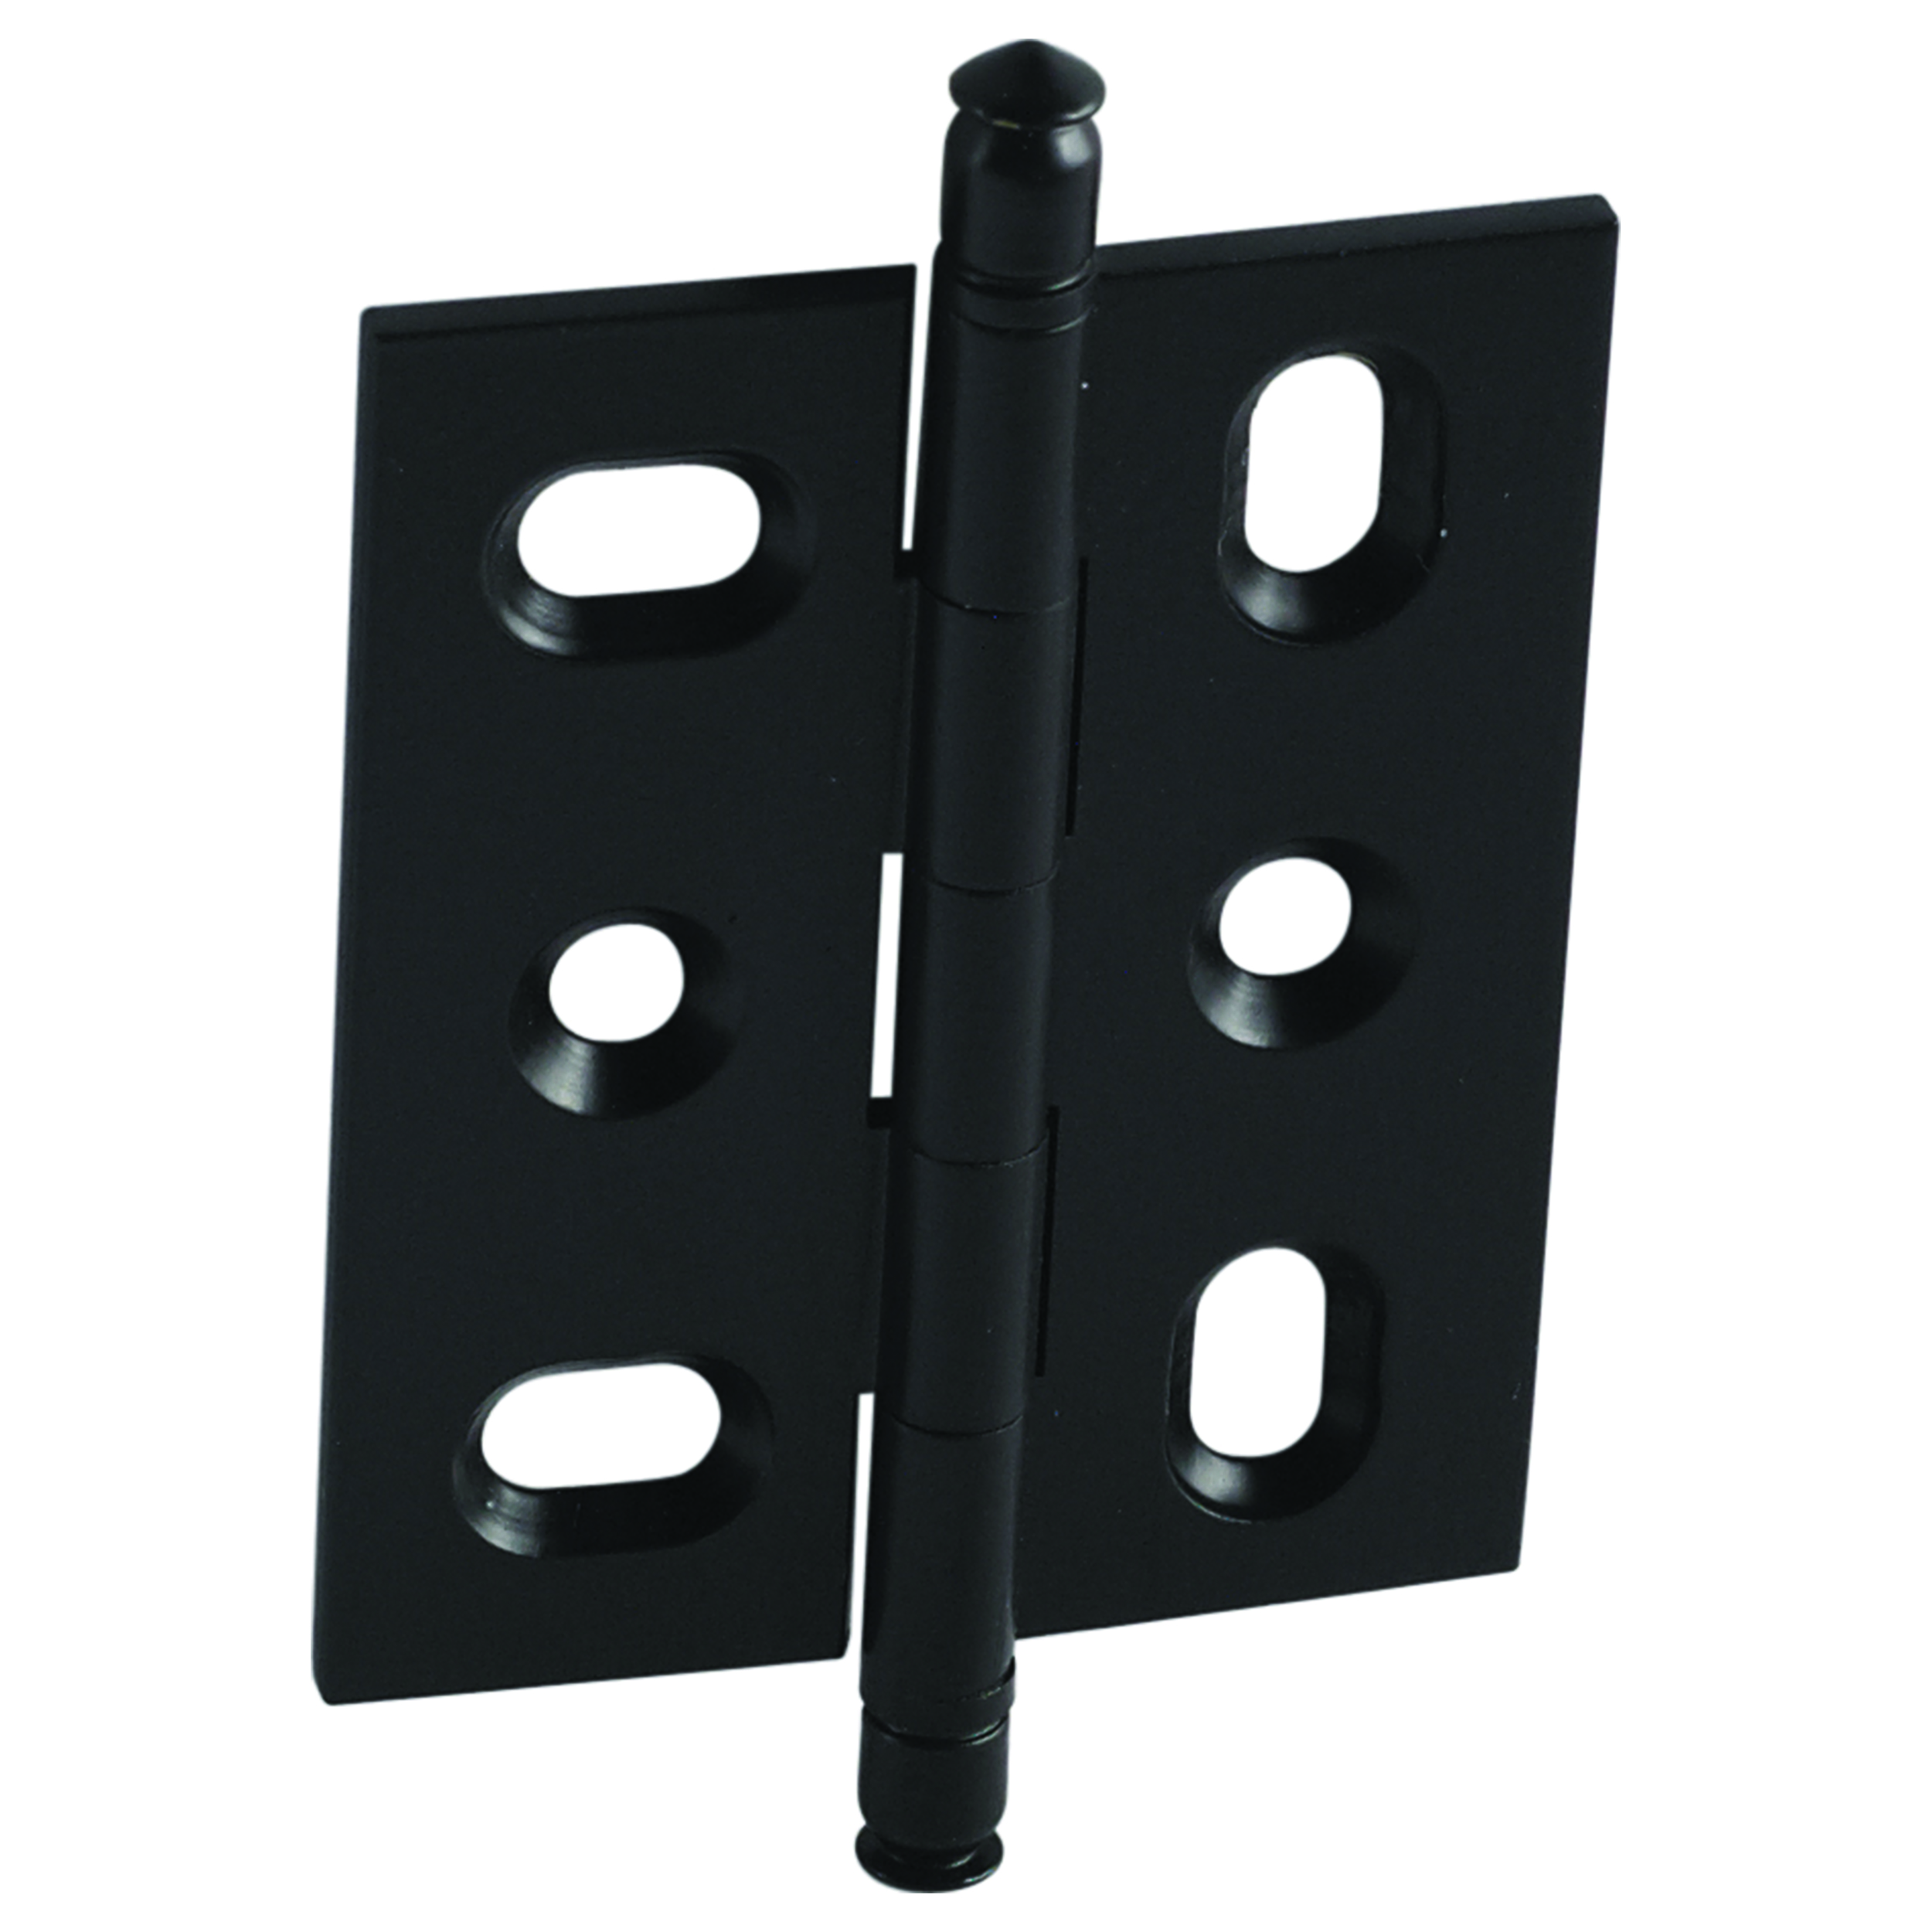 Mortised Decorative Solid Brass Butt Hinge With Finial In Black Matt - Model# 354.22.331